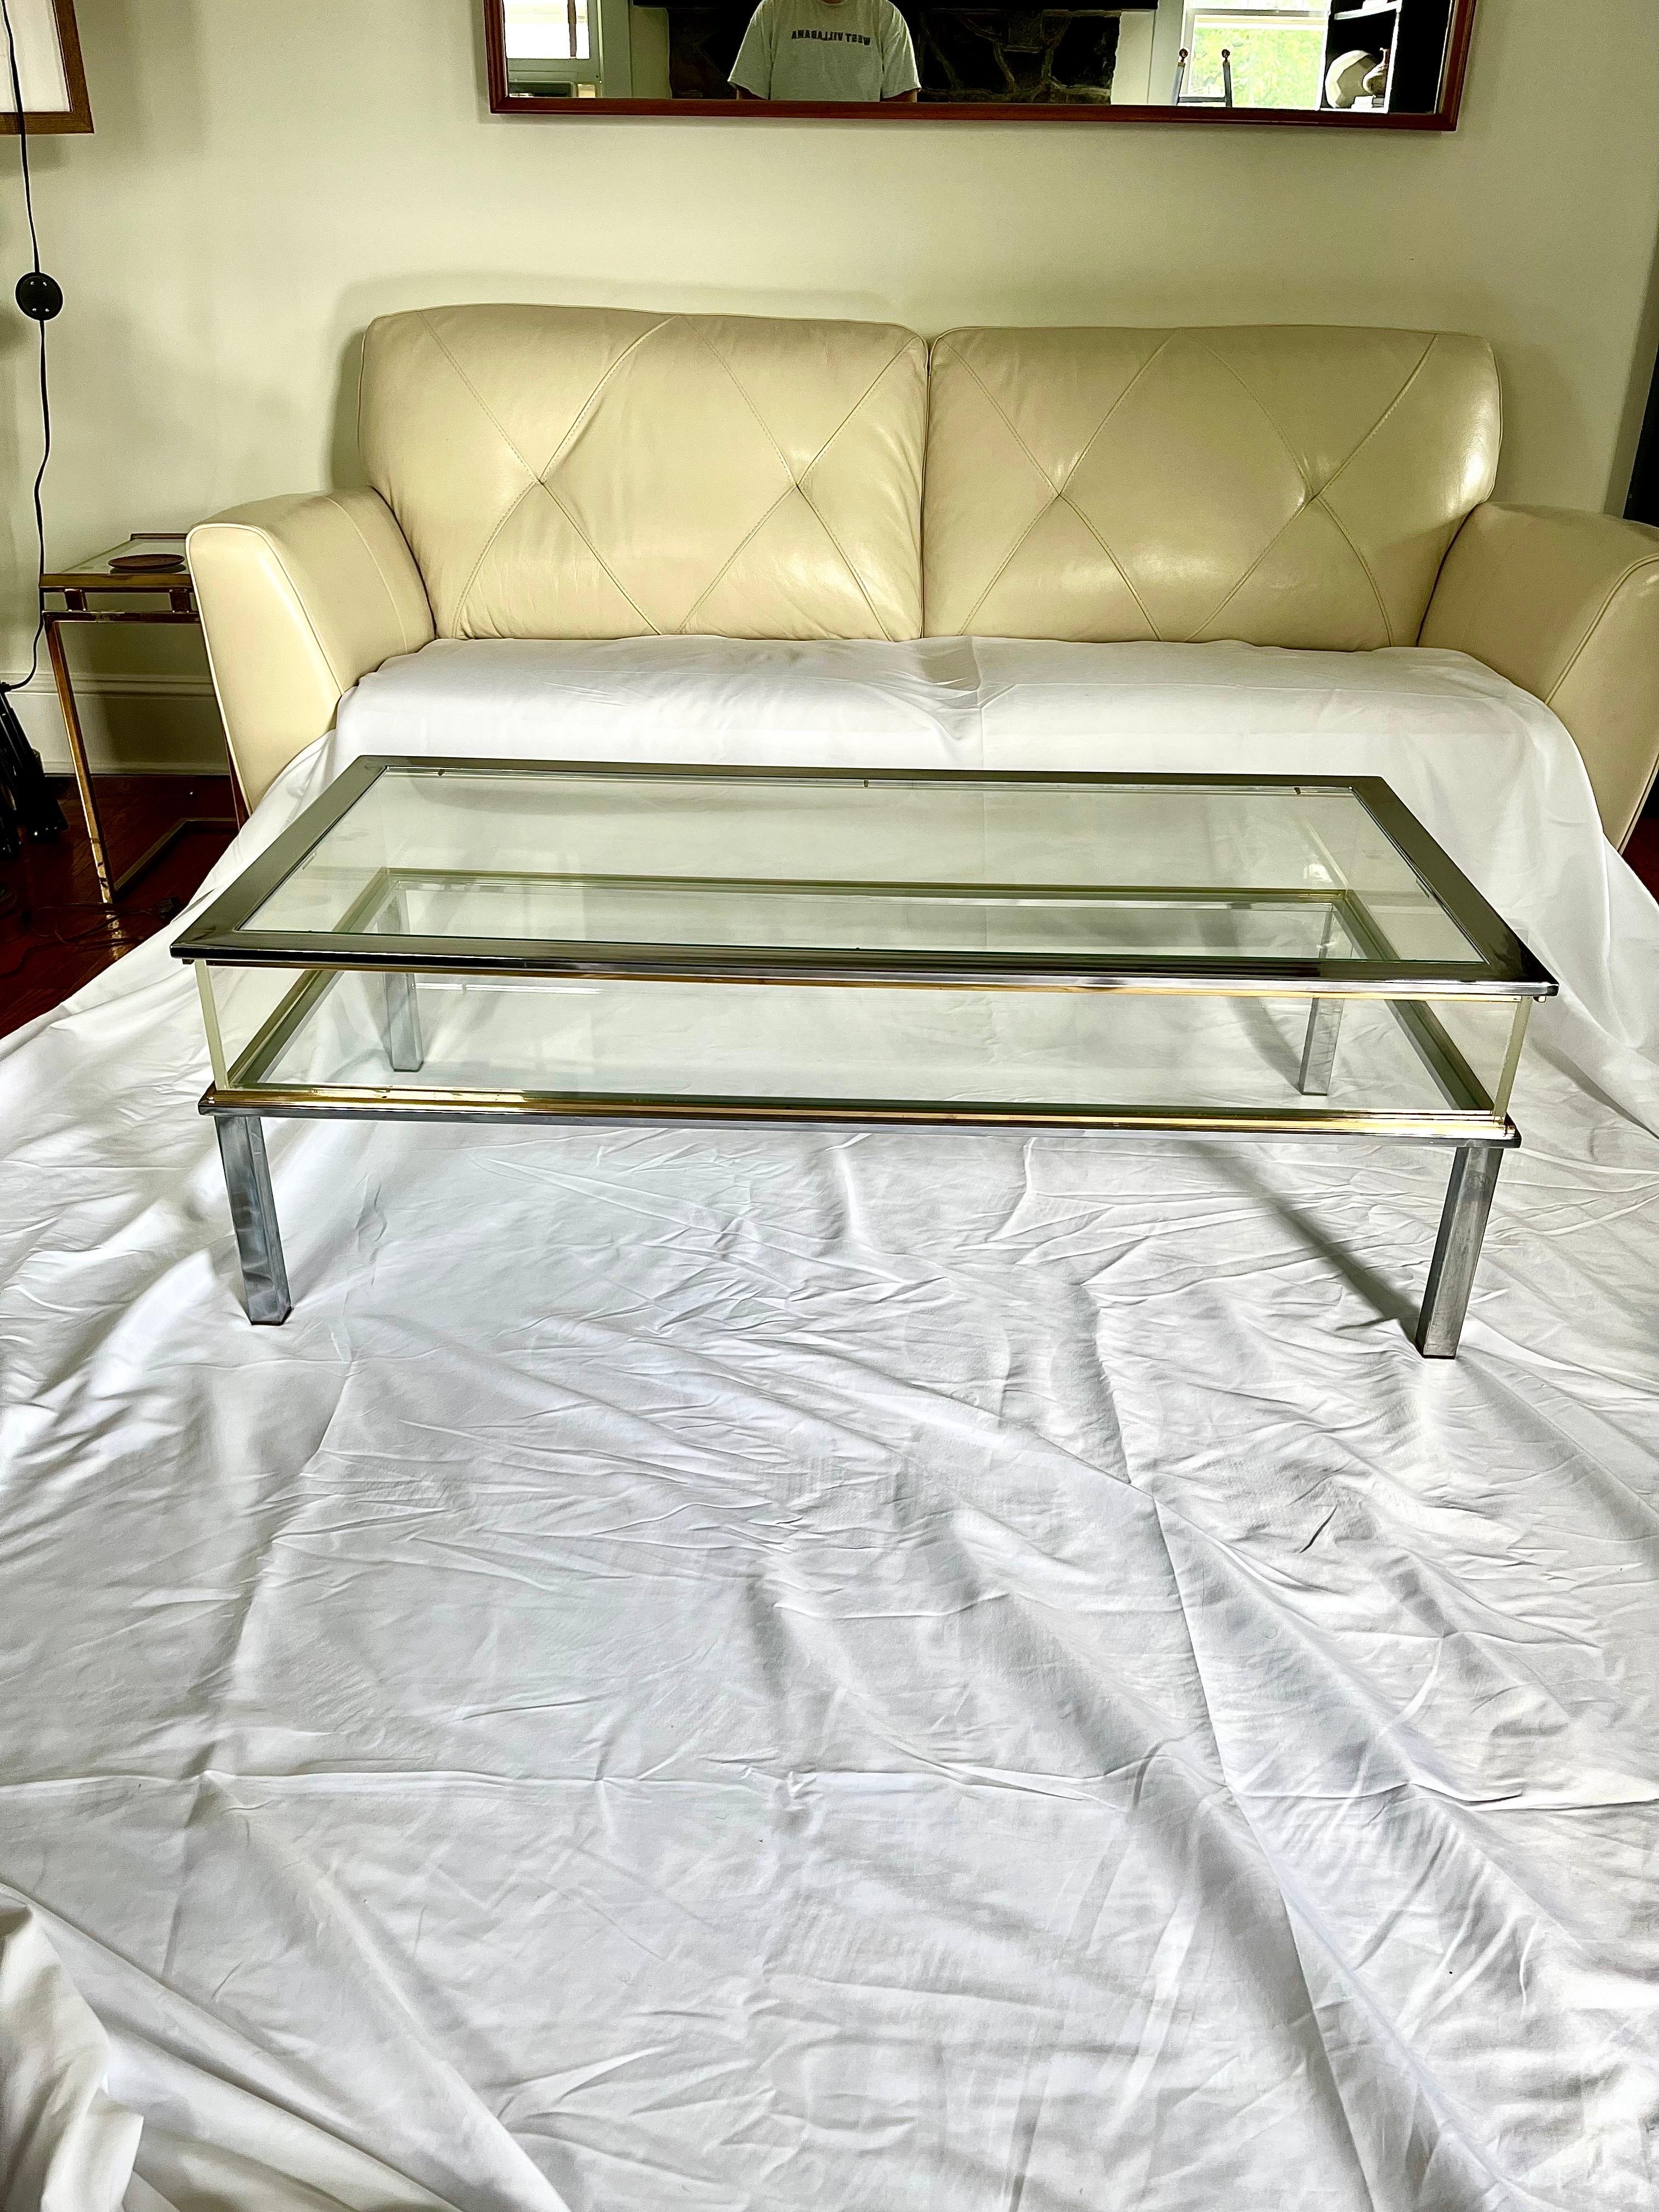 Unique Vitrine coffee table with top sliding open to provide vitrine display case. Rectangular shape with clean lines. Beautiful contrast with brass/bronze and nickel/chrome. Plexiglass display walls. 
Curbside to NYC/Philly $450